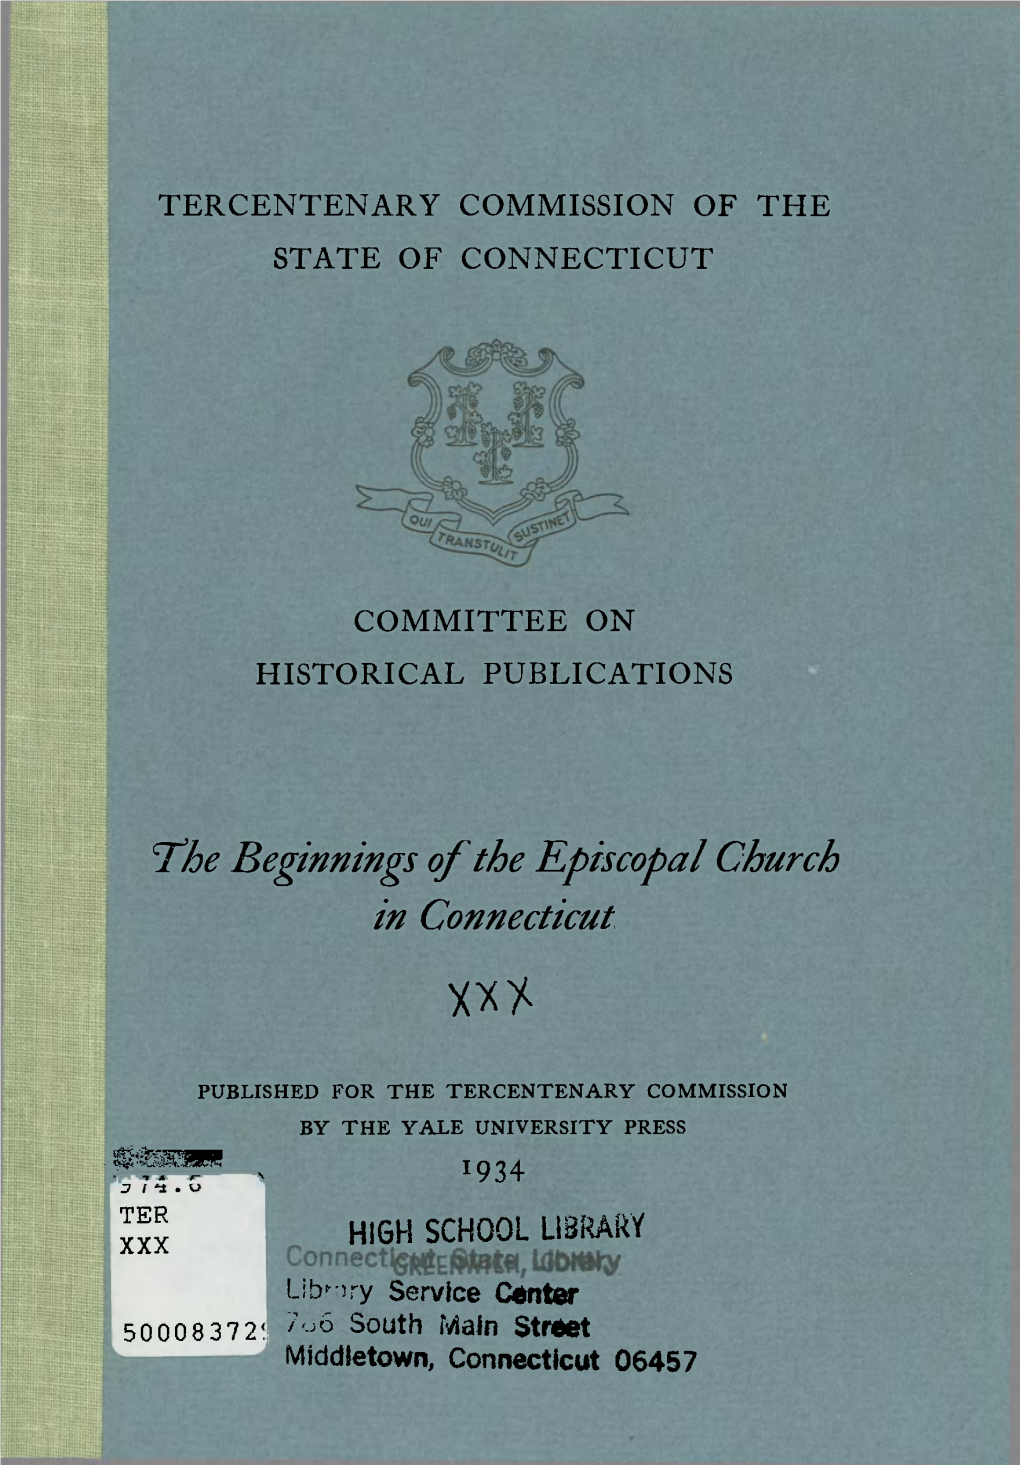 The Beginnings of the Episcopal Church in Connecticut M